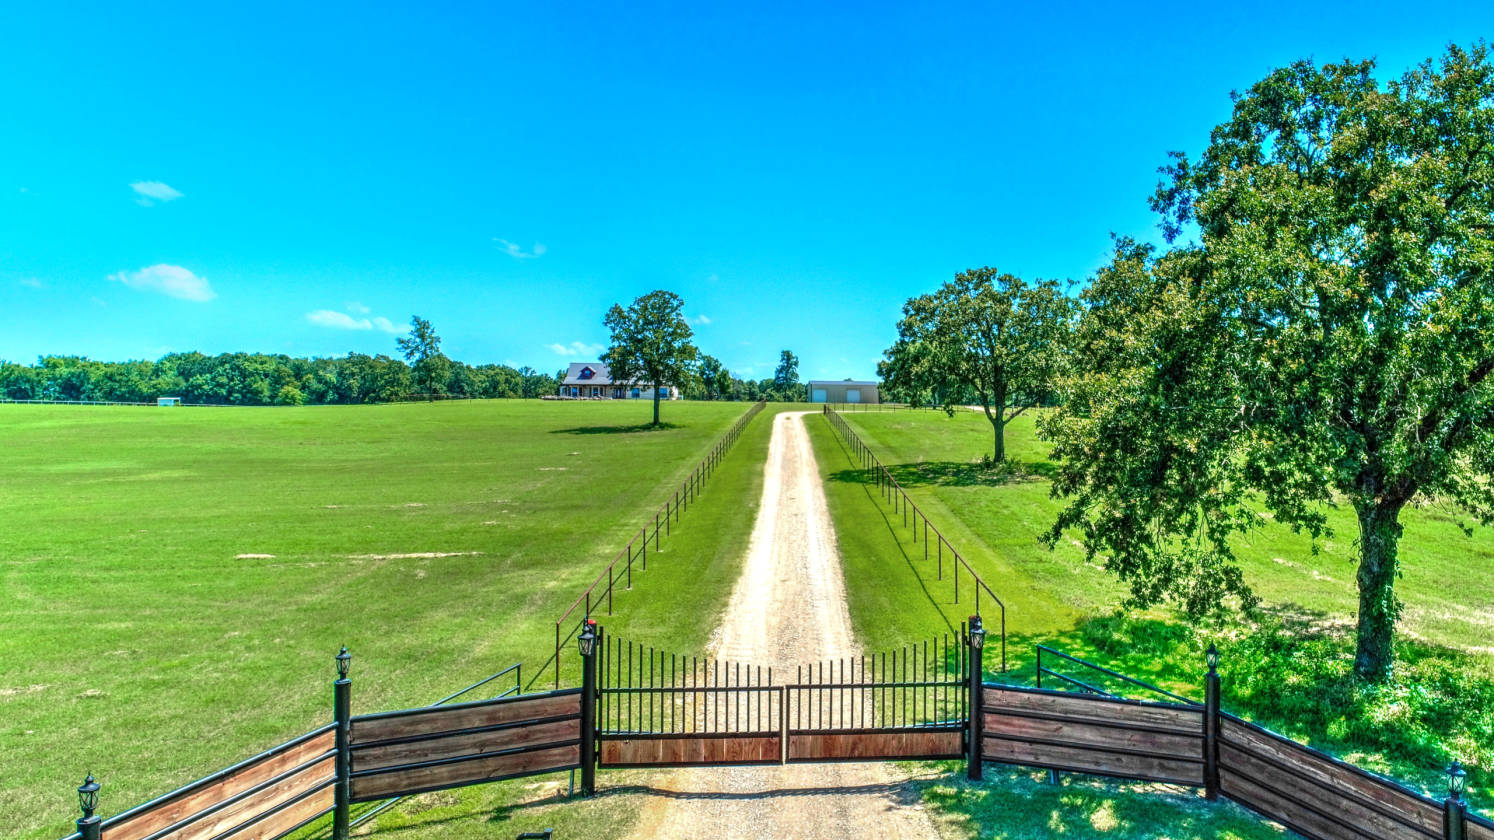 Horse Property For Sale in Oklahoma, Horse Ranches & Farms For Sale in OK